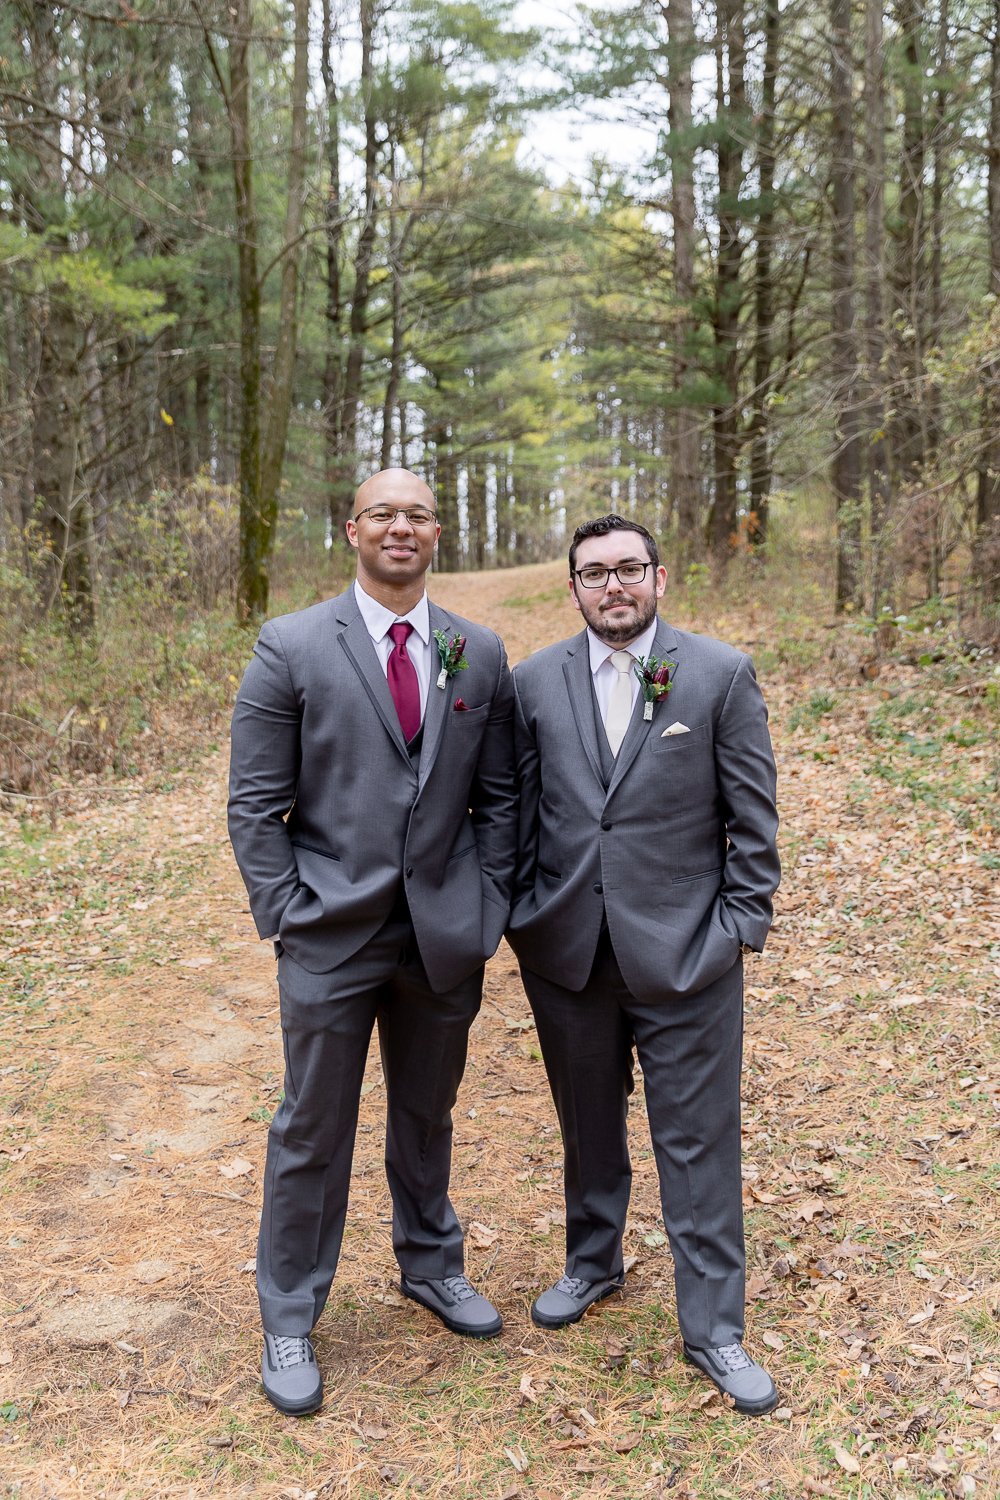 Wedding Party Photos at Wildcat mountain State Park